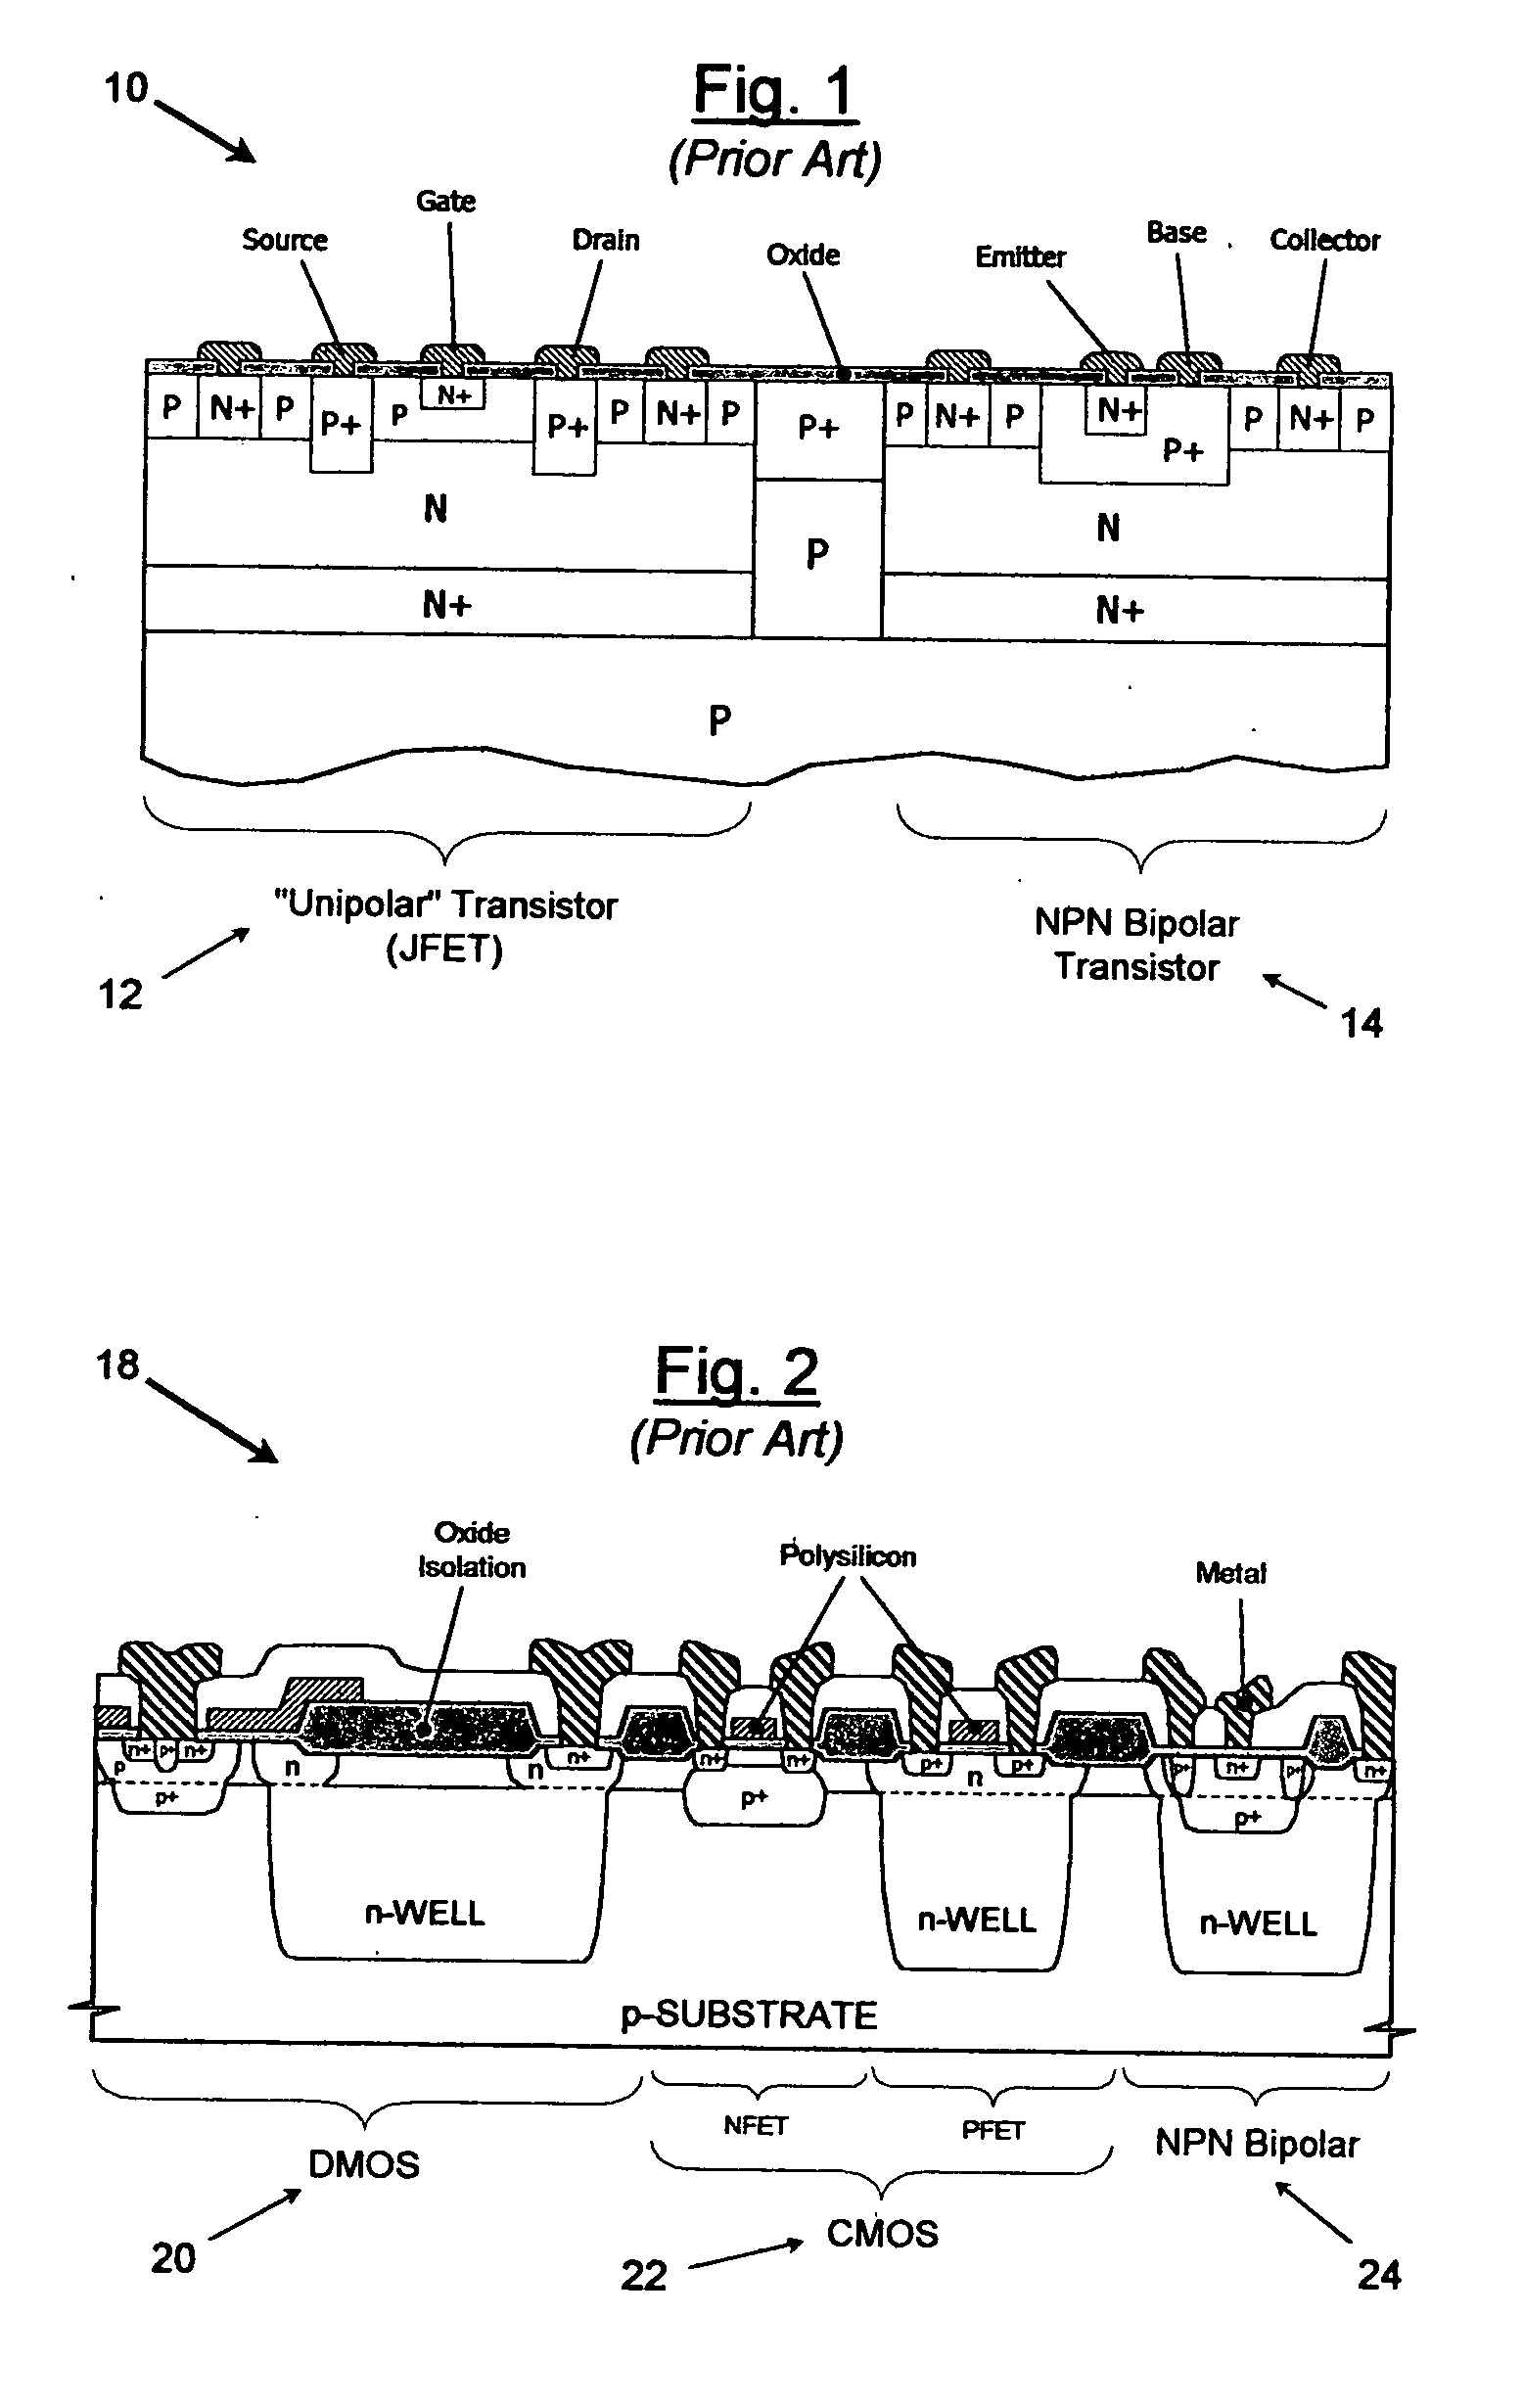 Mixed-signal semiconductor platform incorporating fully-depleted castellated-gate MOSFET device and method of manufacture thereof